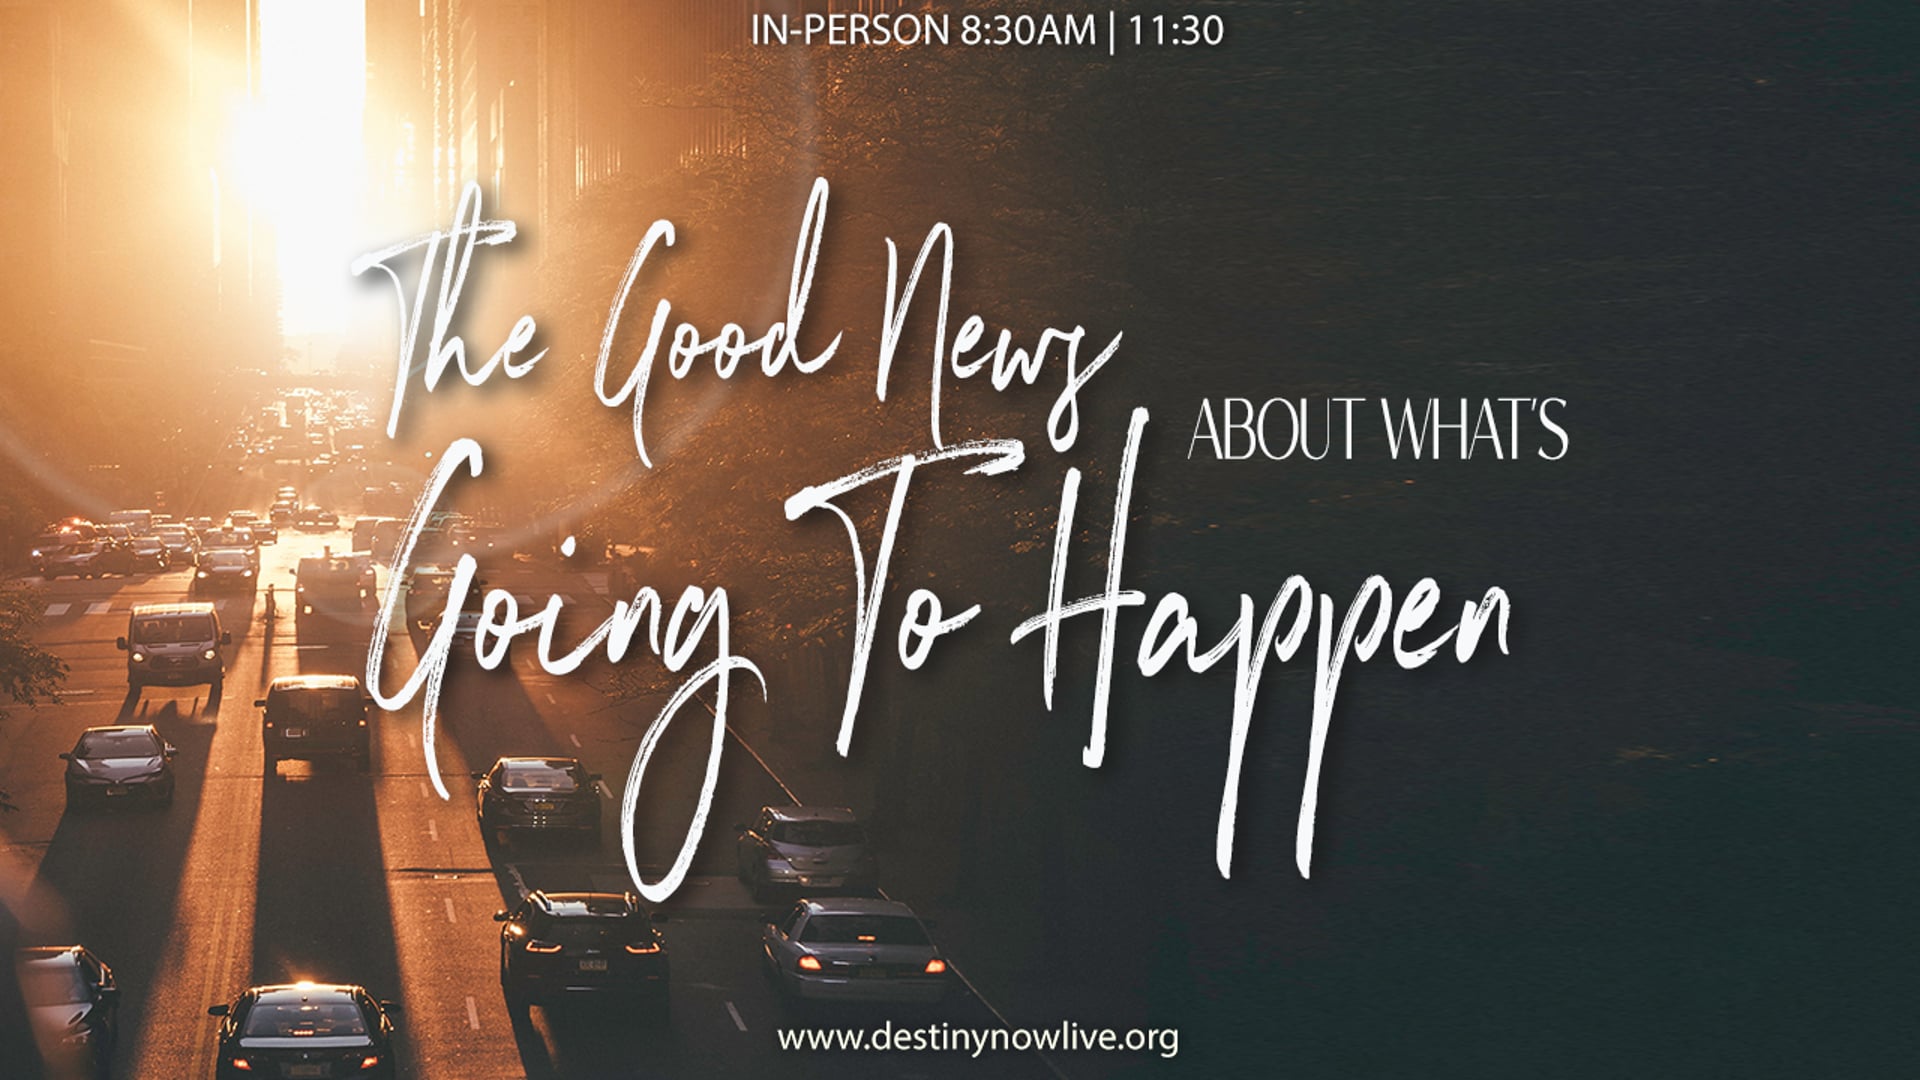 "The Good News about What's Going To Happen" - Online Giving: Text to Give - 910-460-3377 - Give Online @ www.destinynow.org